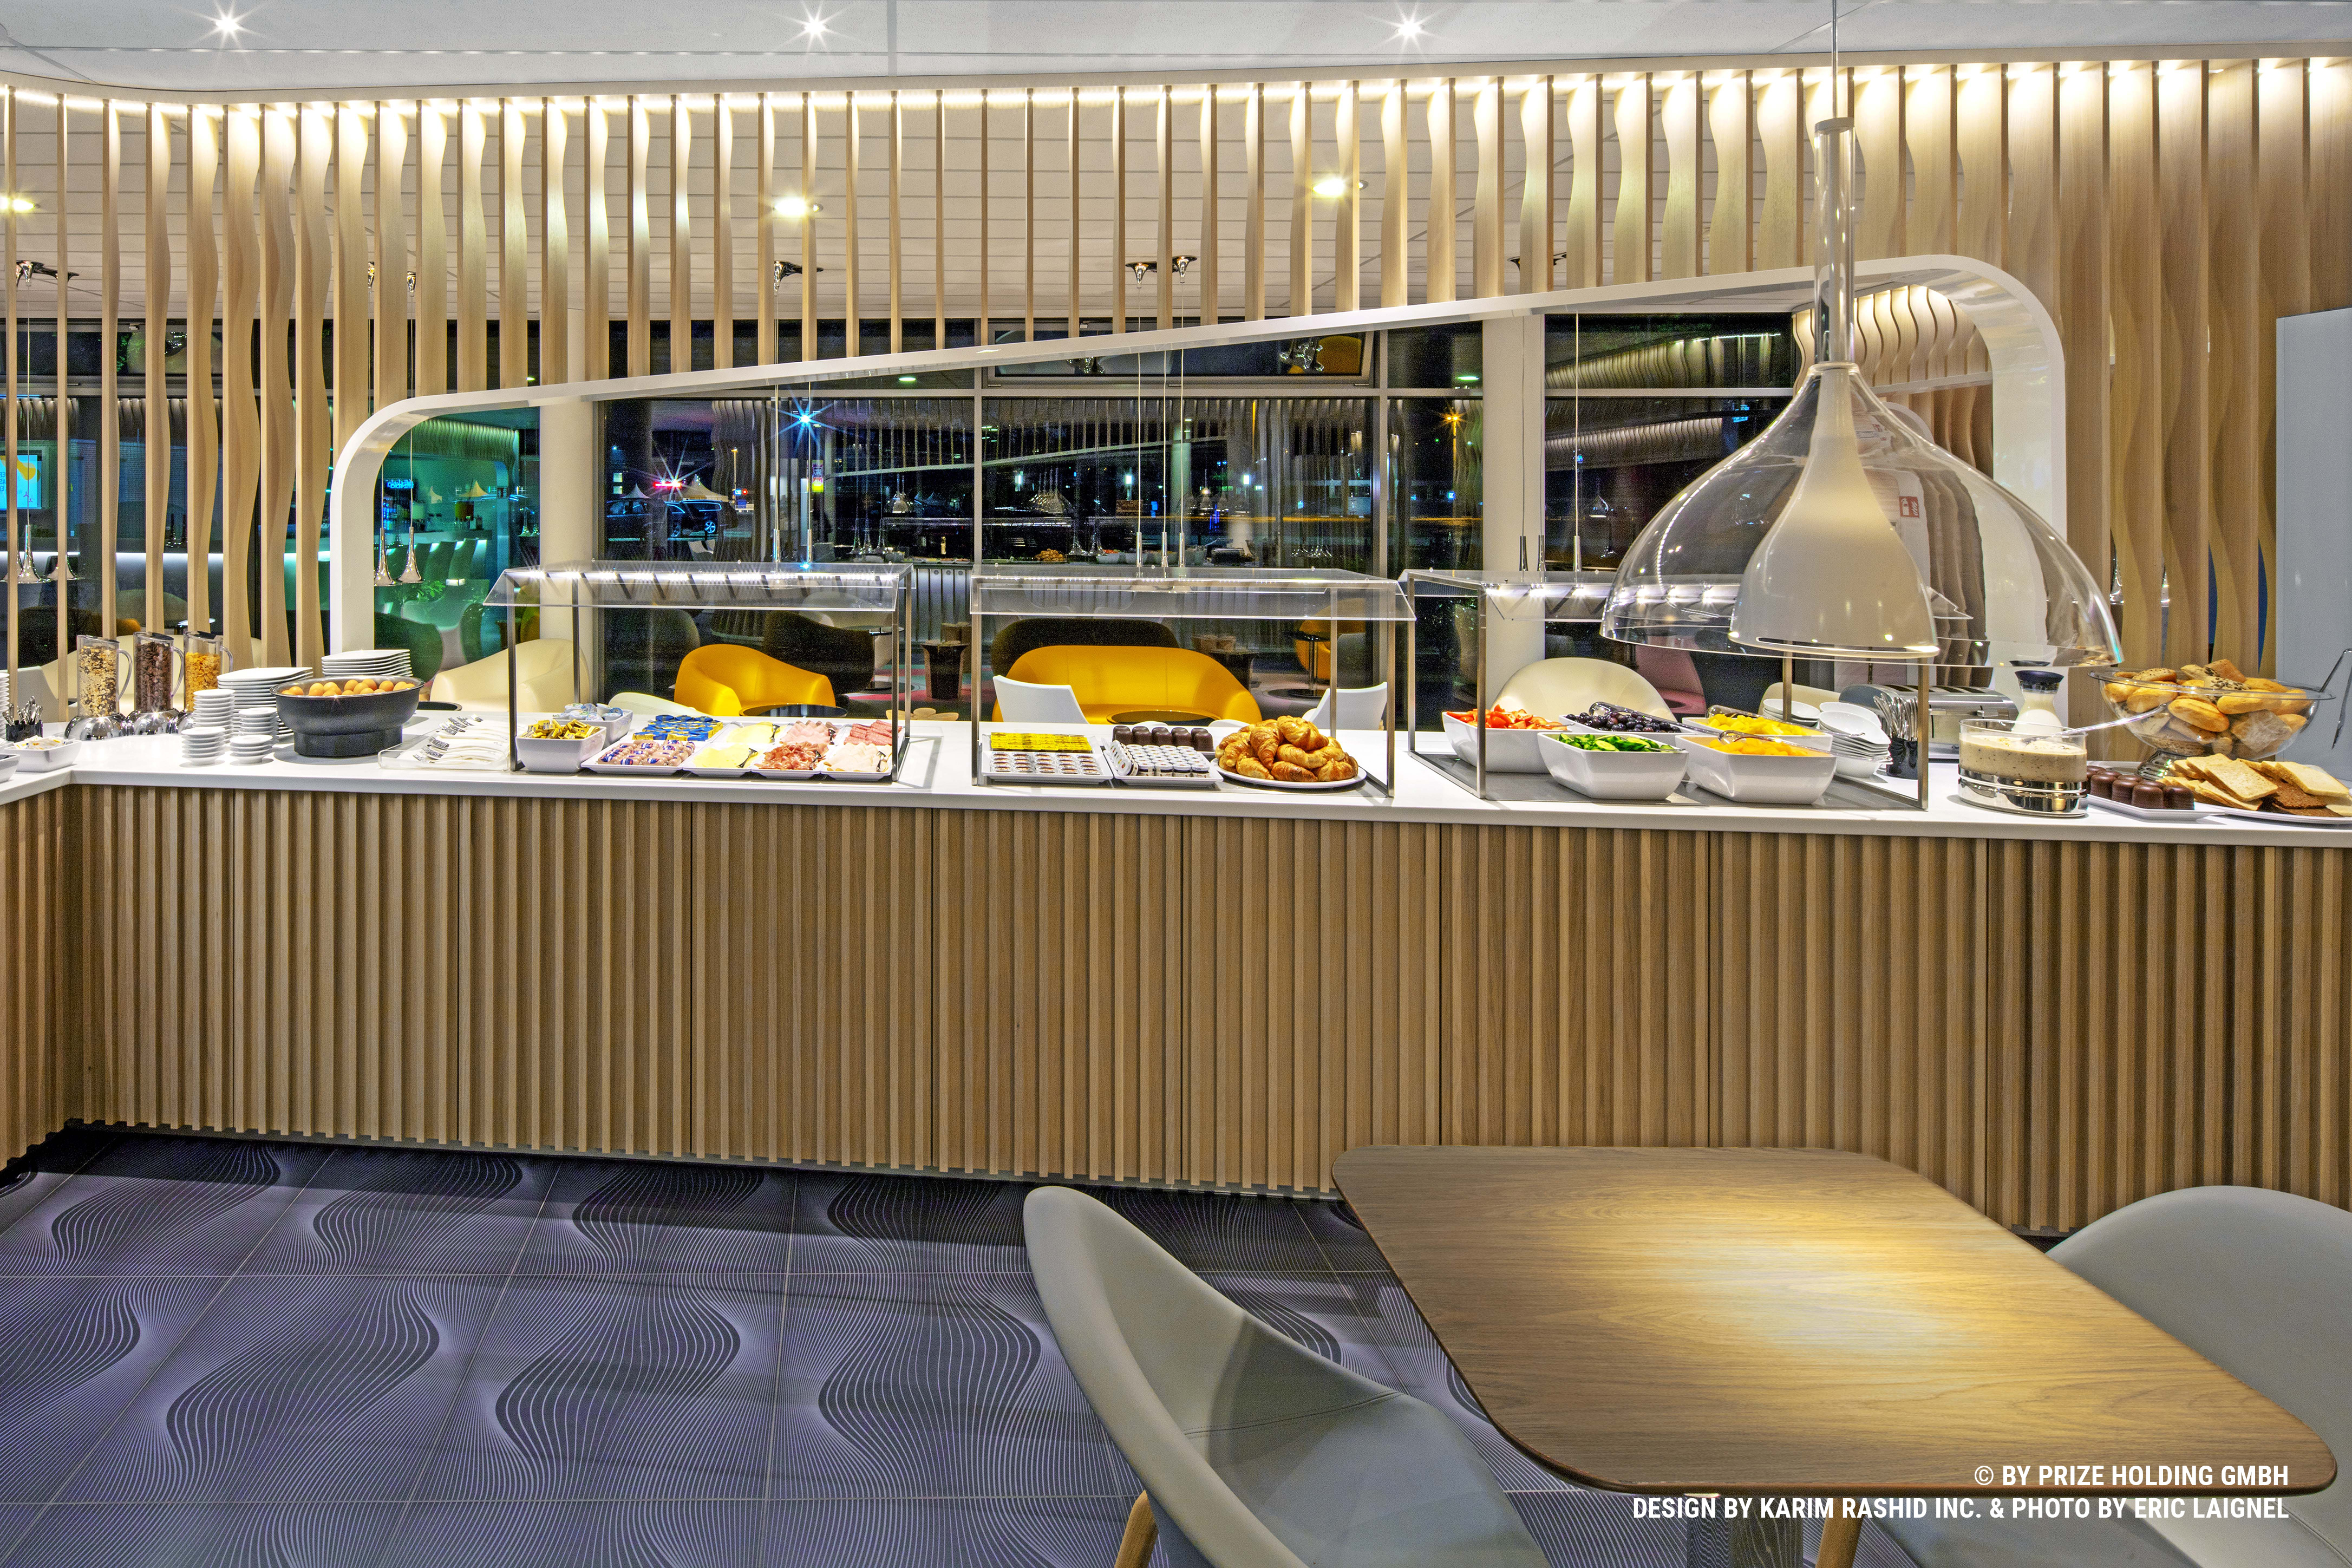 Breakfast buffet with golden elements and a variety of food